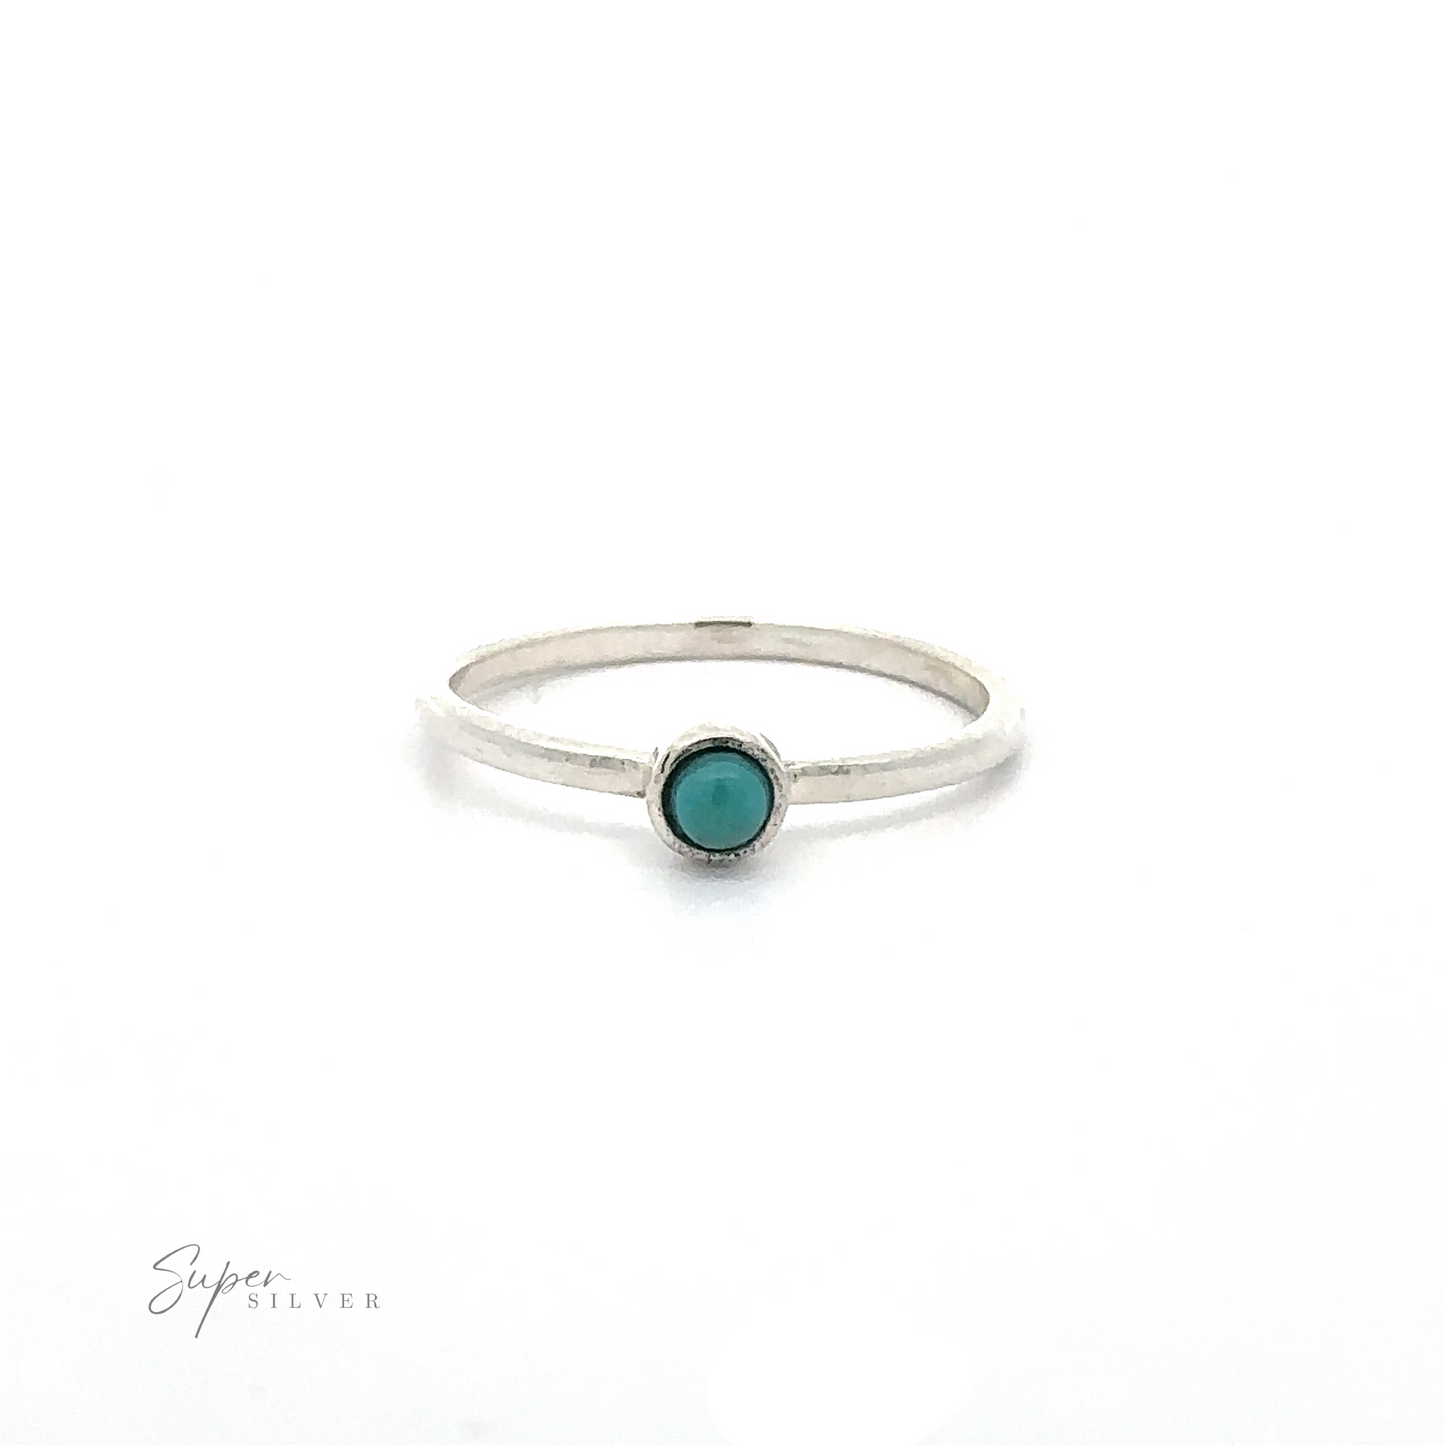 
                  
                    A simple silver ring with a small turquoise stone in the center, perfect for lovers of minimalist fashion. Displayed on a white background, the words "Dainty Stackable Round Gemstone Ring" are visible in the lower left corner. Ideal for stacking with other sterling silver or stackable rings.
                  
                